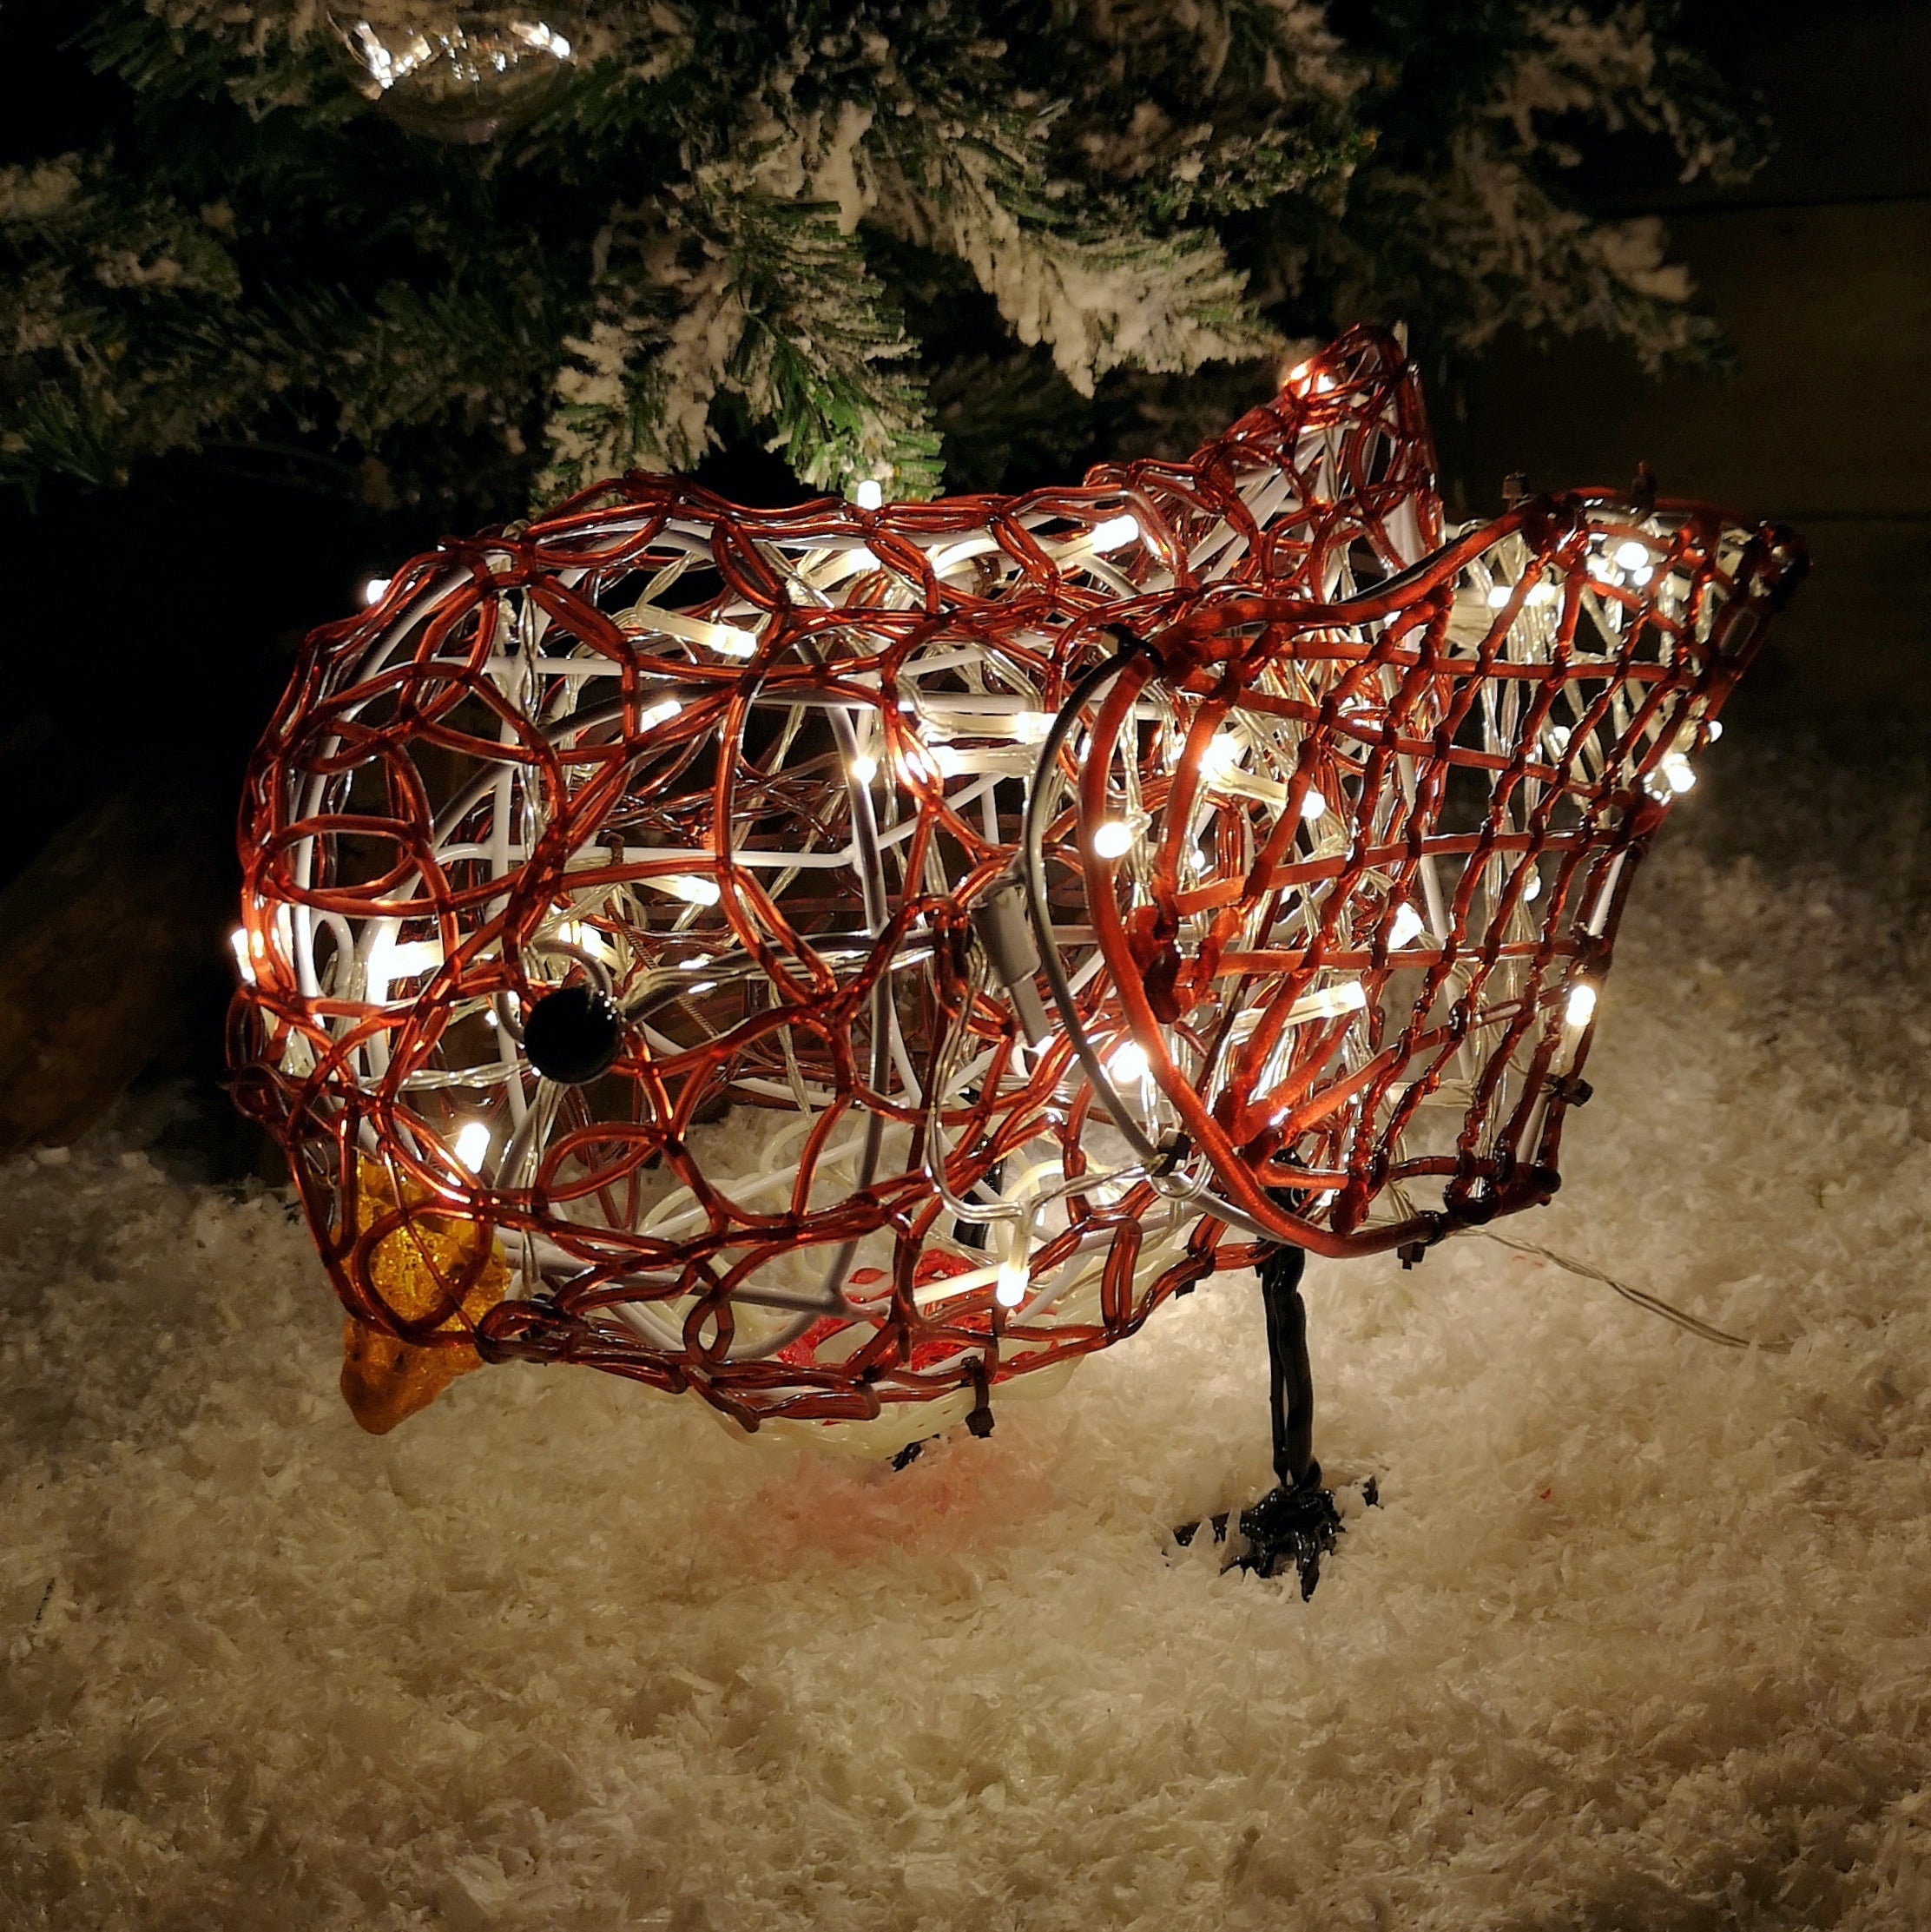 Image of 30cm Premier Soft Acrylic Outdoor Lit Christmas Robin with 60 Warm White LEDs